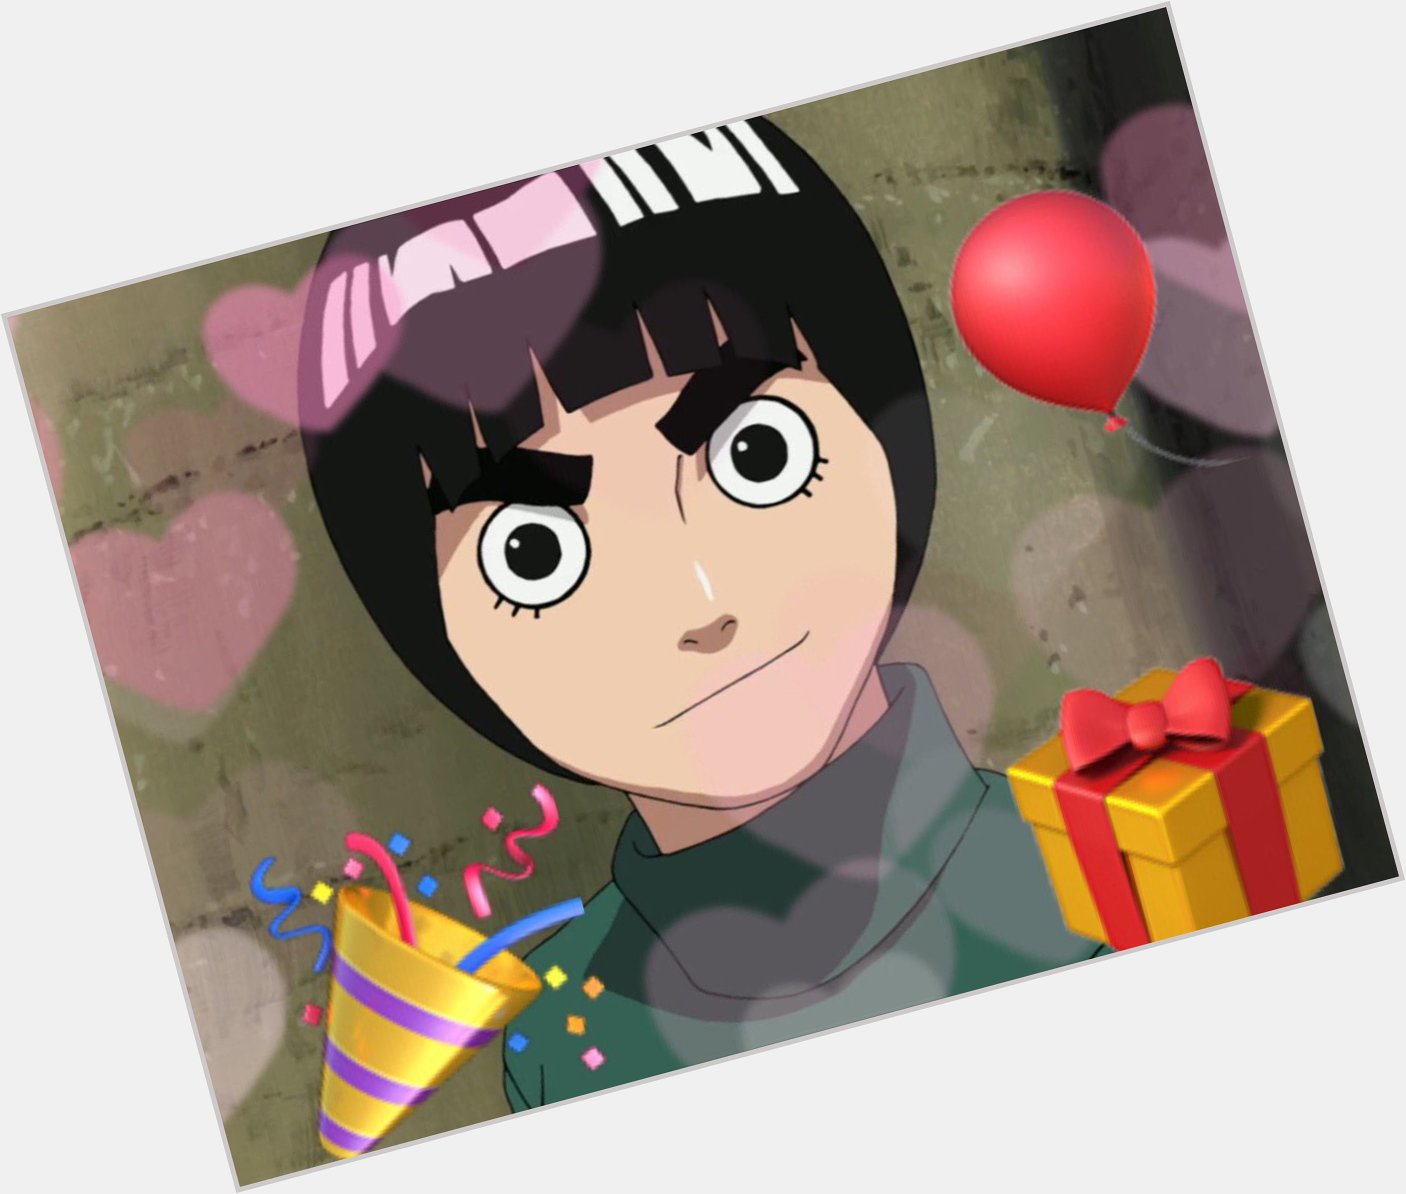 HAPPY BIRTHDAY TO MY SPECIAL BOY ROCK LEE!!!!!!!!!
GIVE HIM LOTS OF LOVE BECAUSE THATS WHAT HE DESERVES!!!!!!! 